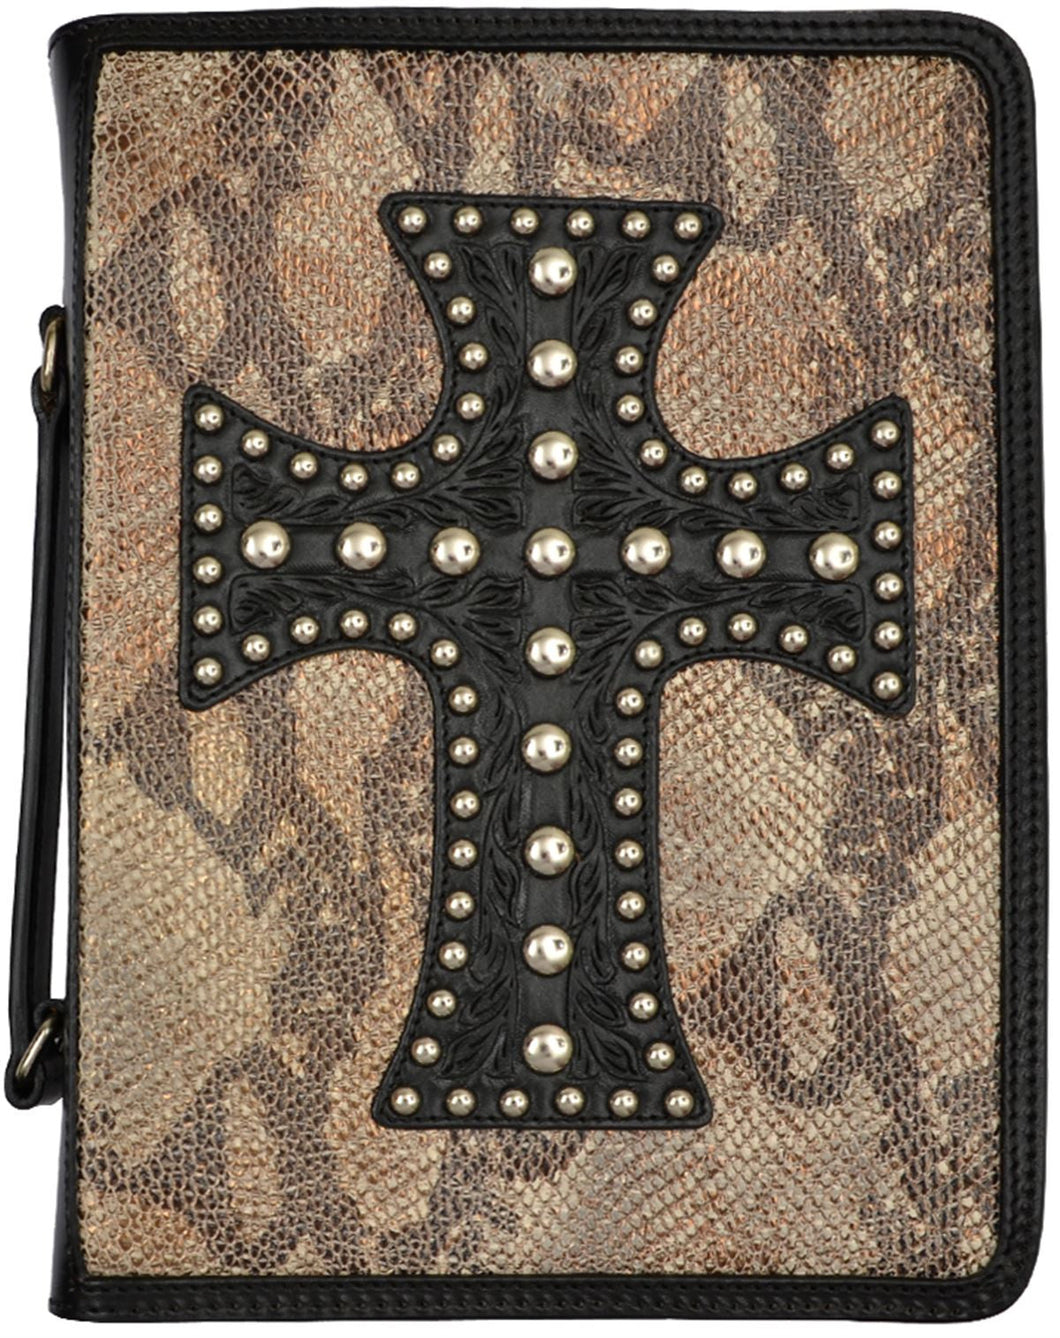 (3DB-BI300) Western Black Bible Cover with Cross and Snake Skin Print